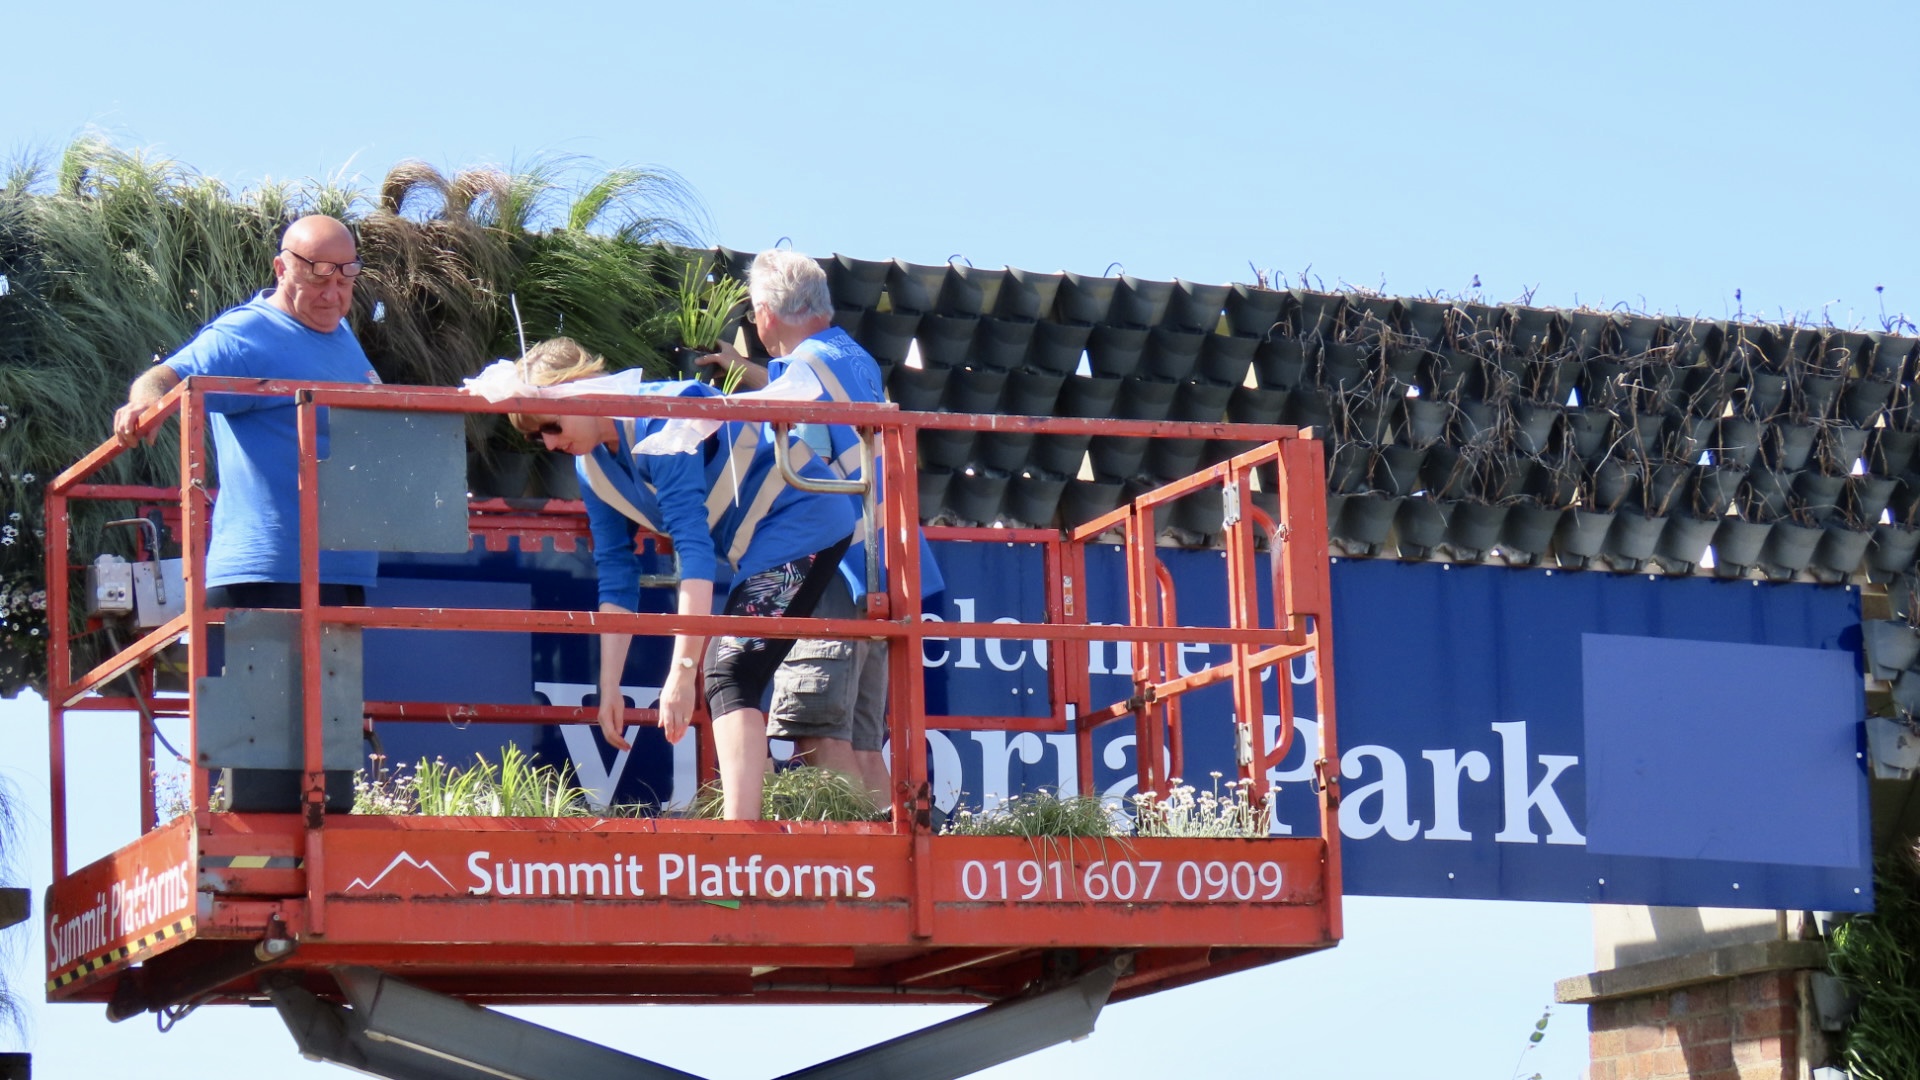 Volunteers are hard at work creating the stunning living wall archway that will welcome visitors to the 2023 Southport Flower Show. Photo by Andrew Brown Stand Up For Southport